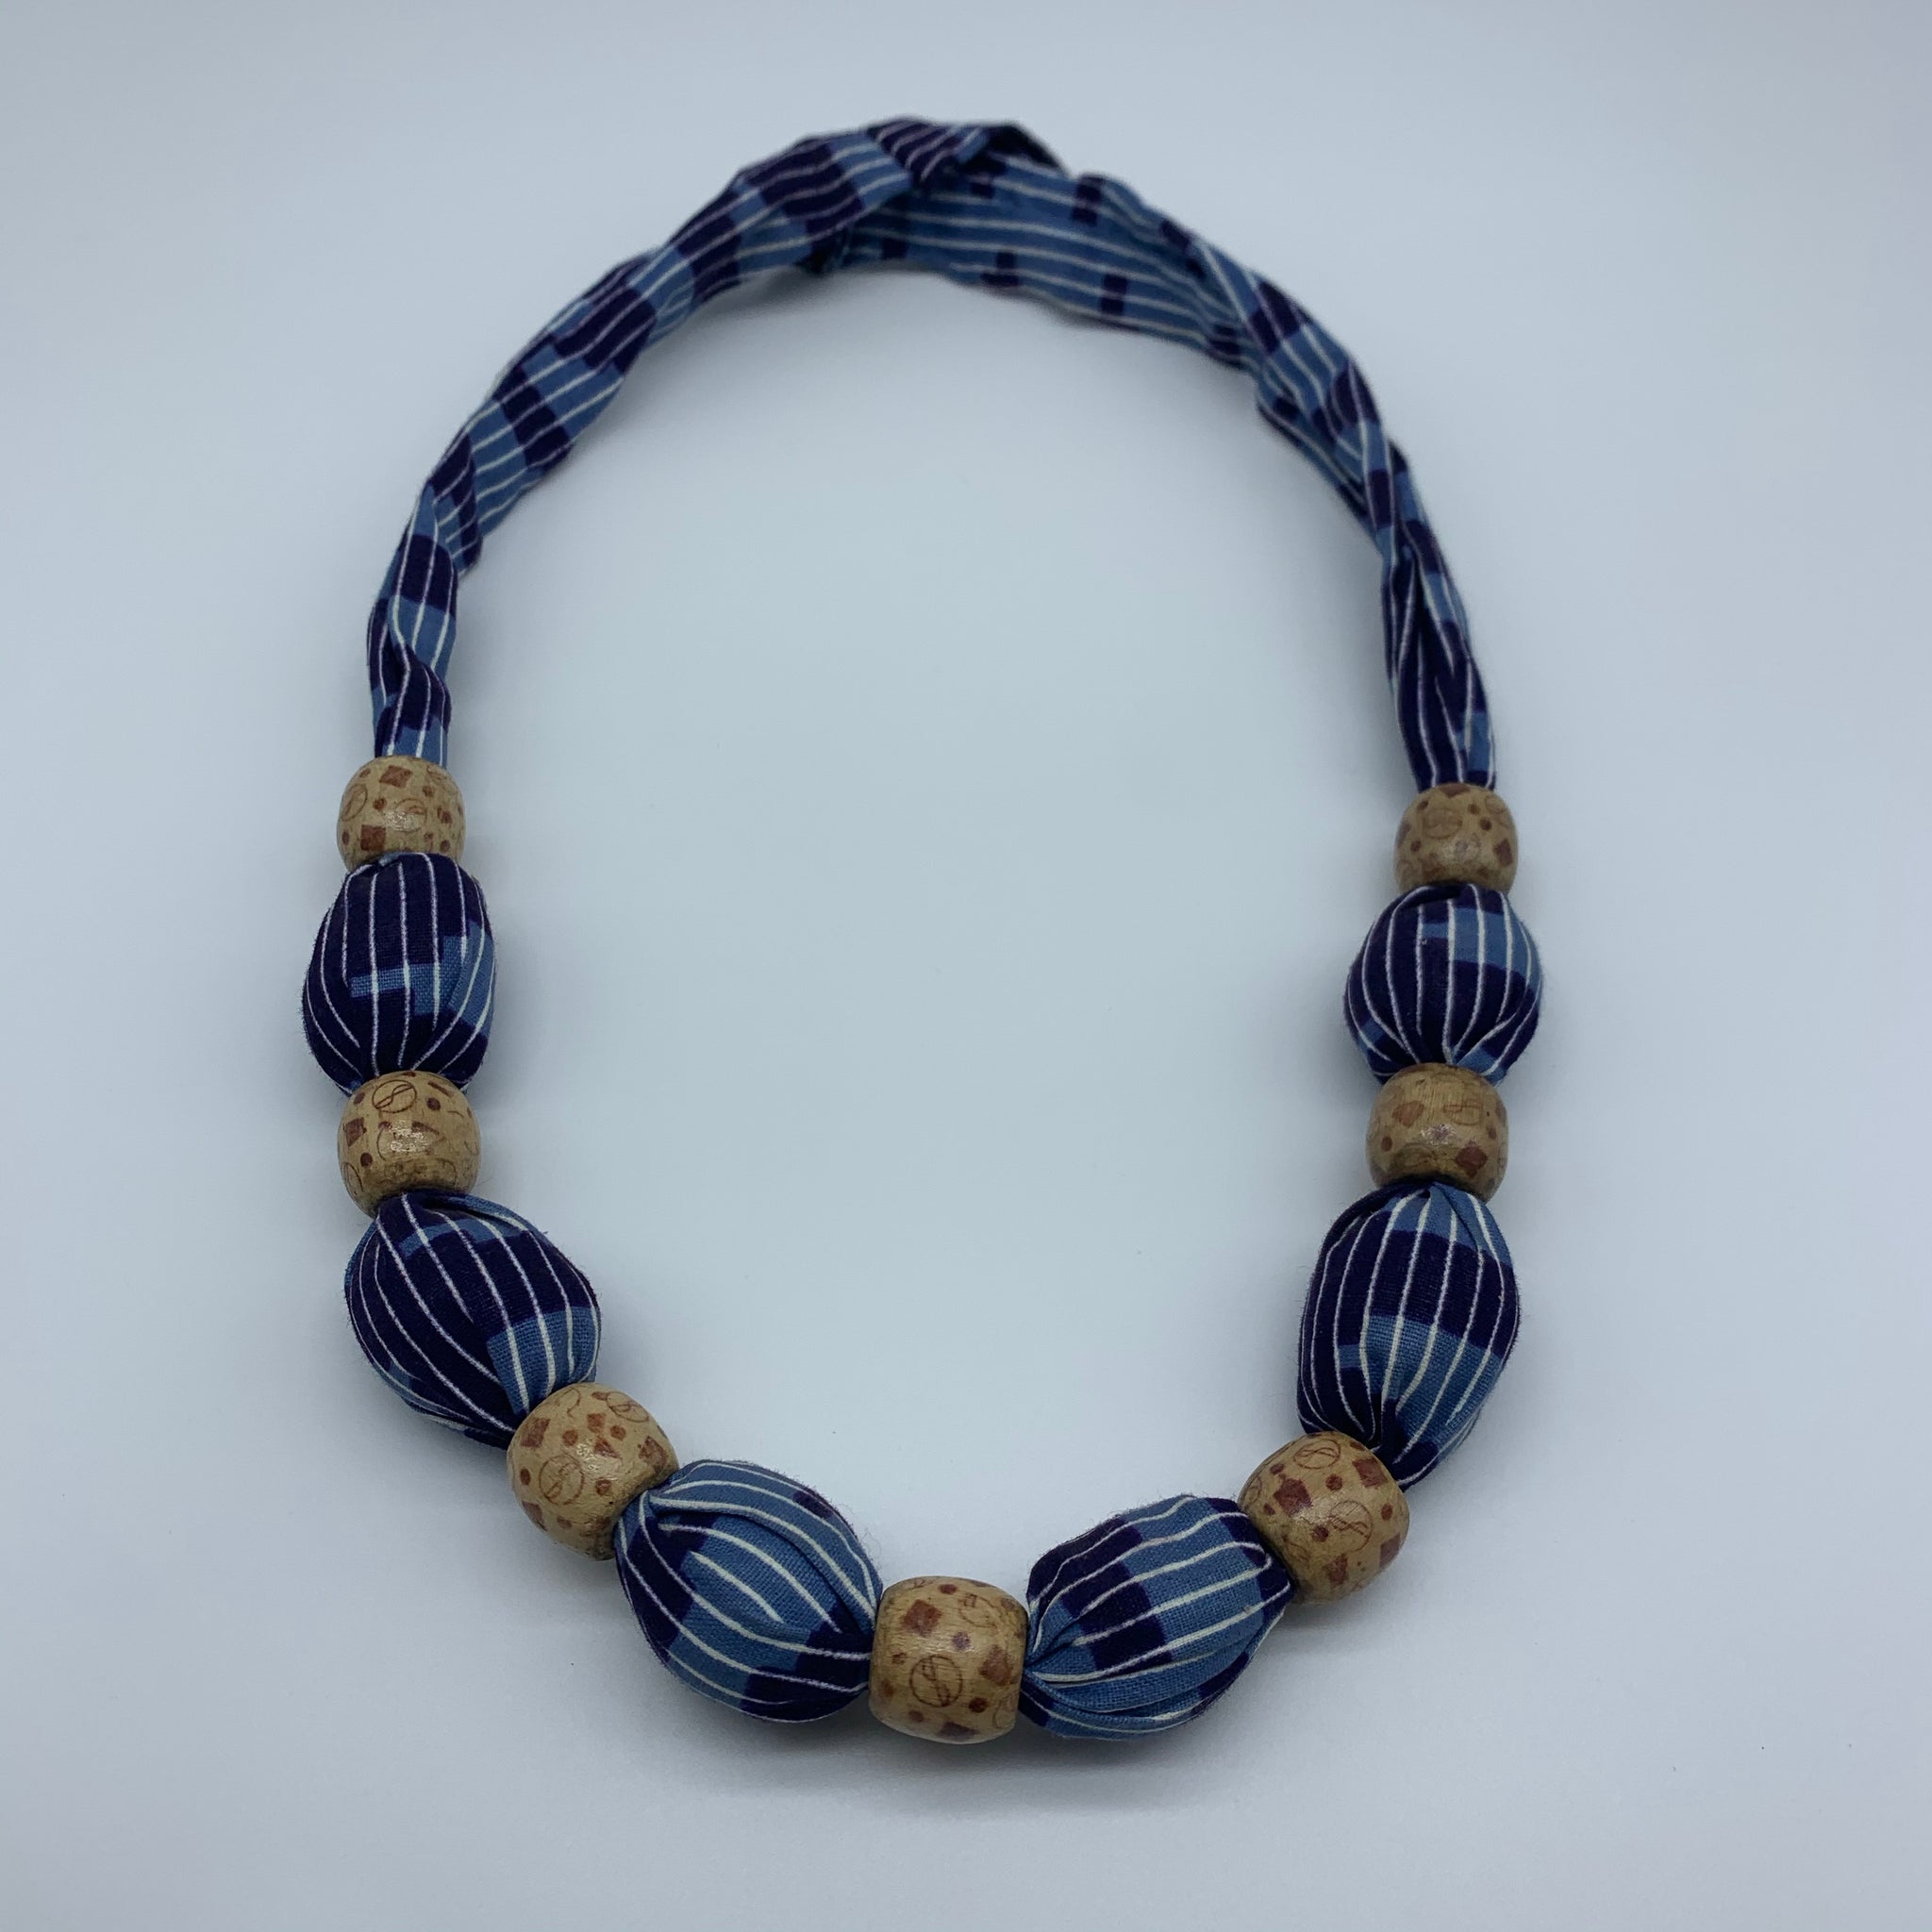 African Print Necklace W/Wooden Beads-Blue Variation 2 - Lillon Boutique